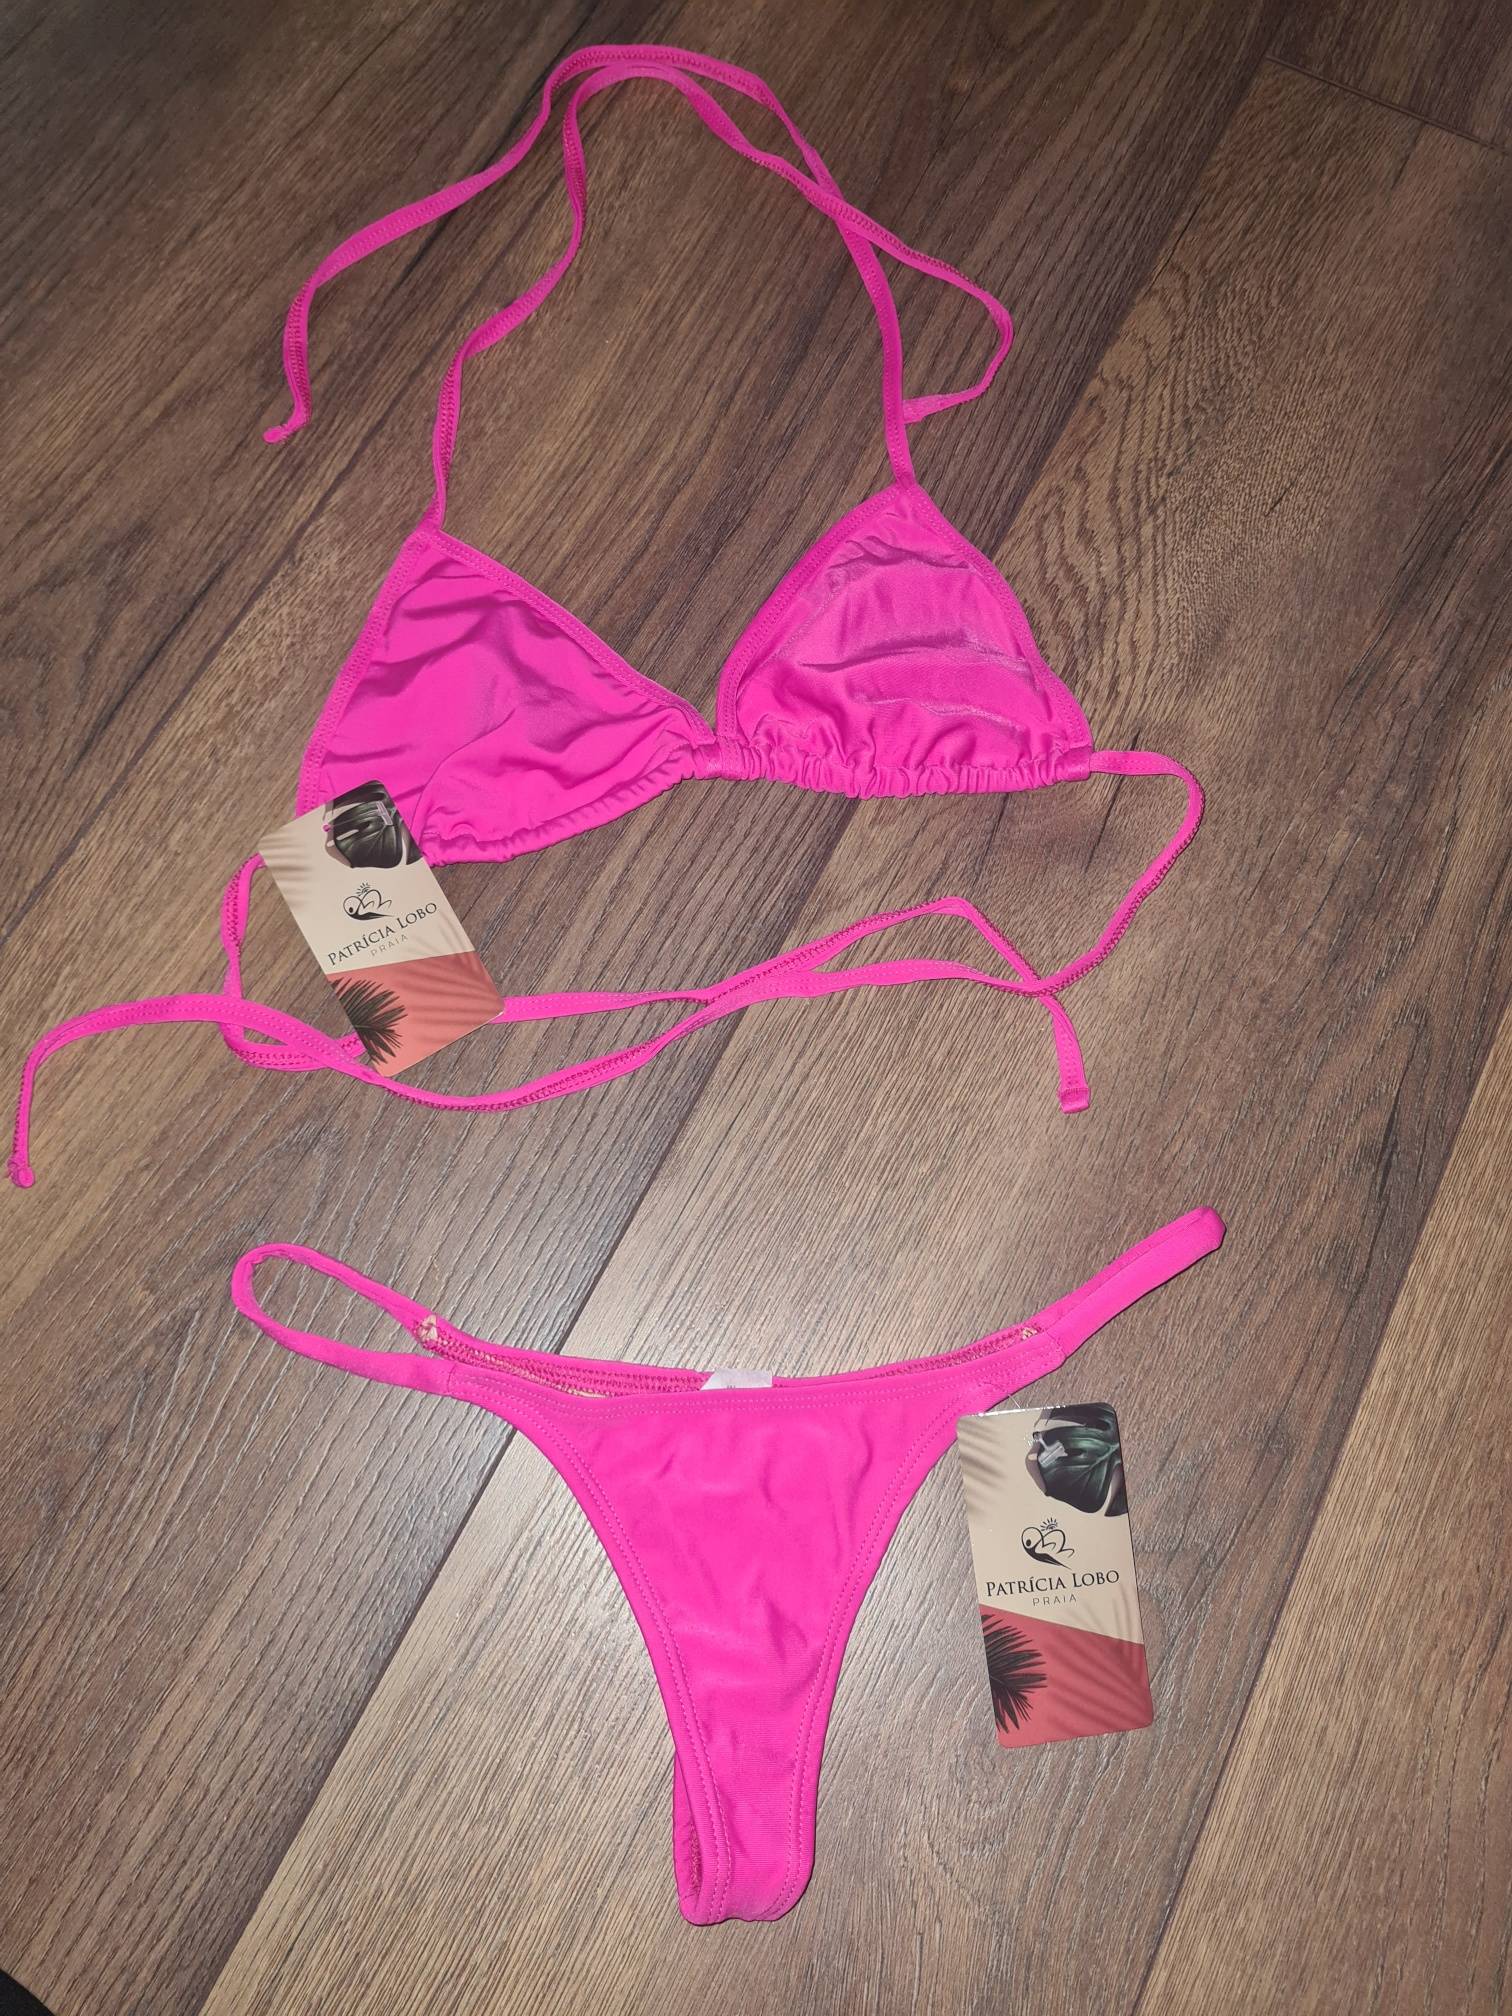 Melodrama baas Kracht Patricia Lobo String Bikini (2-delig) Donker Roze - All About Tanning